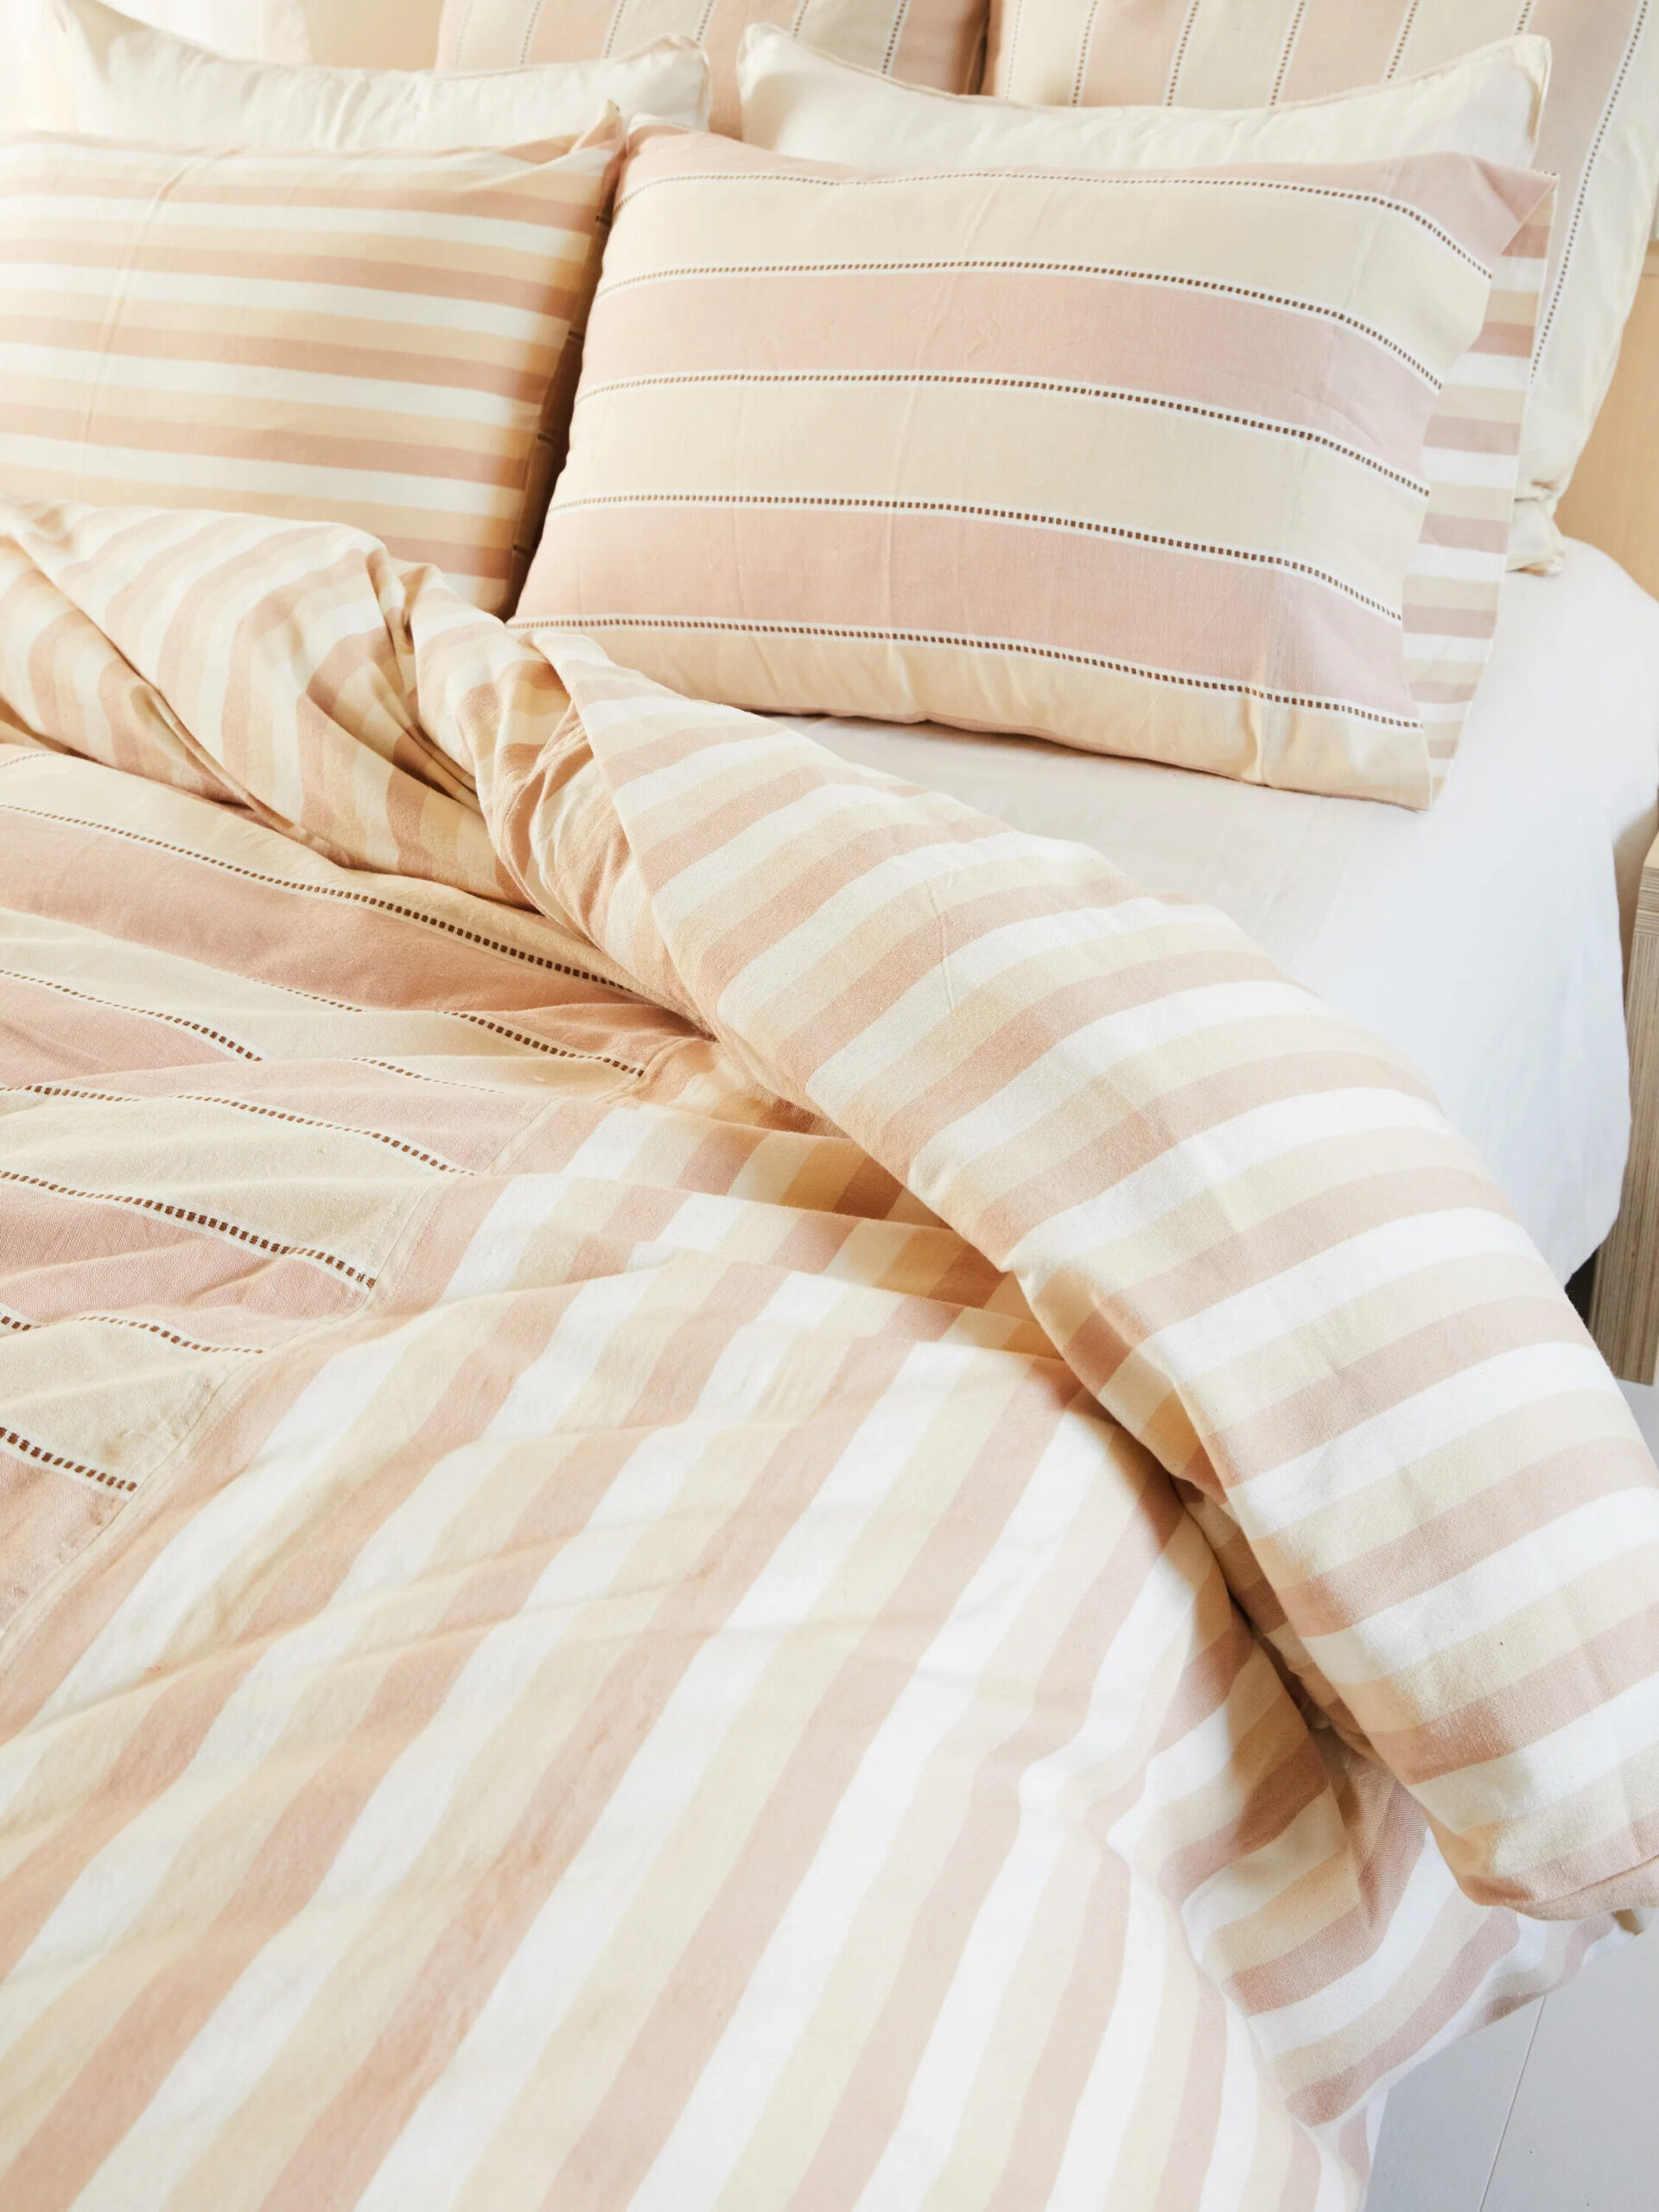 Salmon pink and pale yellow striped duvet and pillowcase by Minna. 